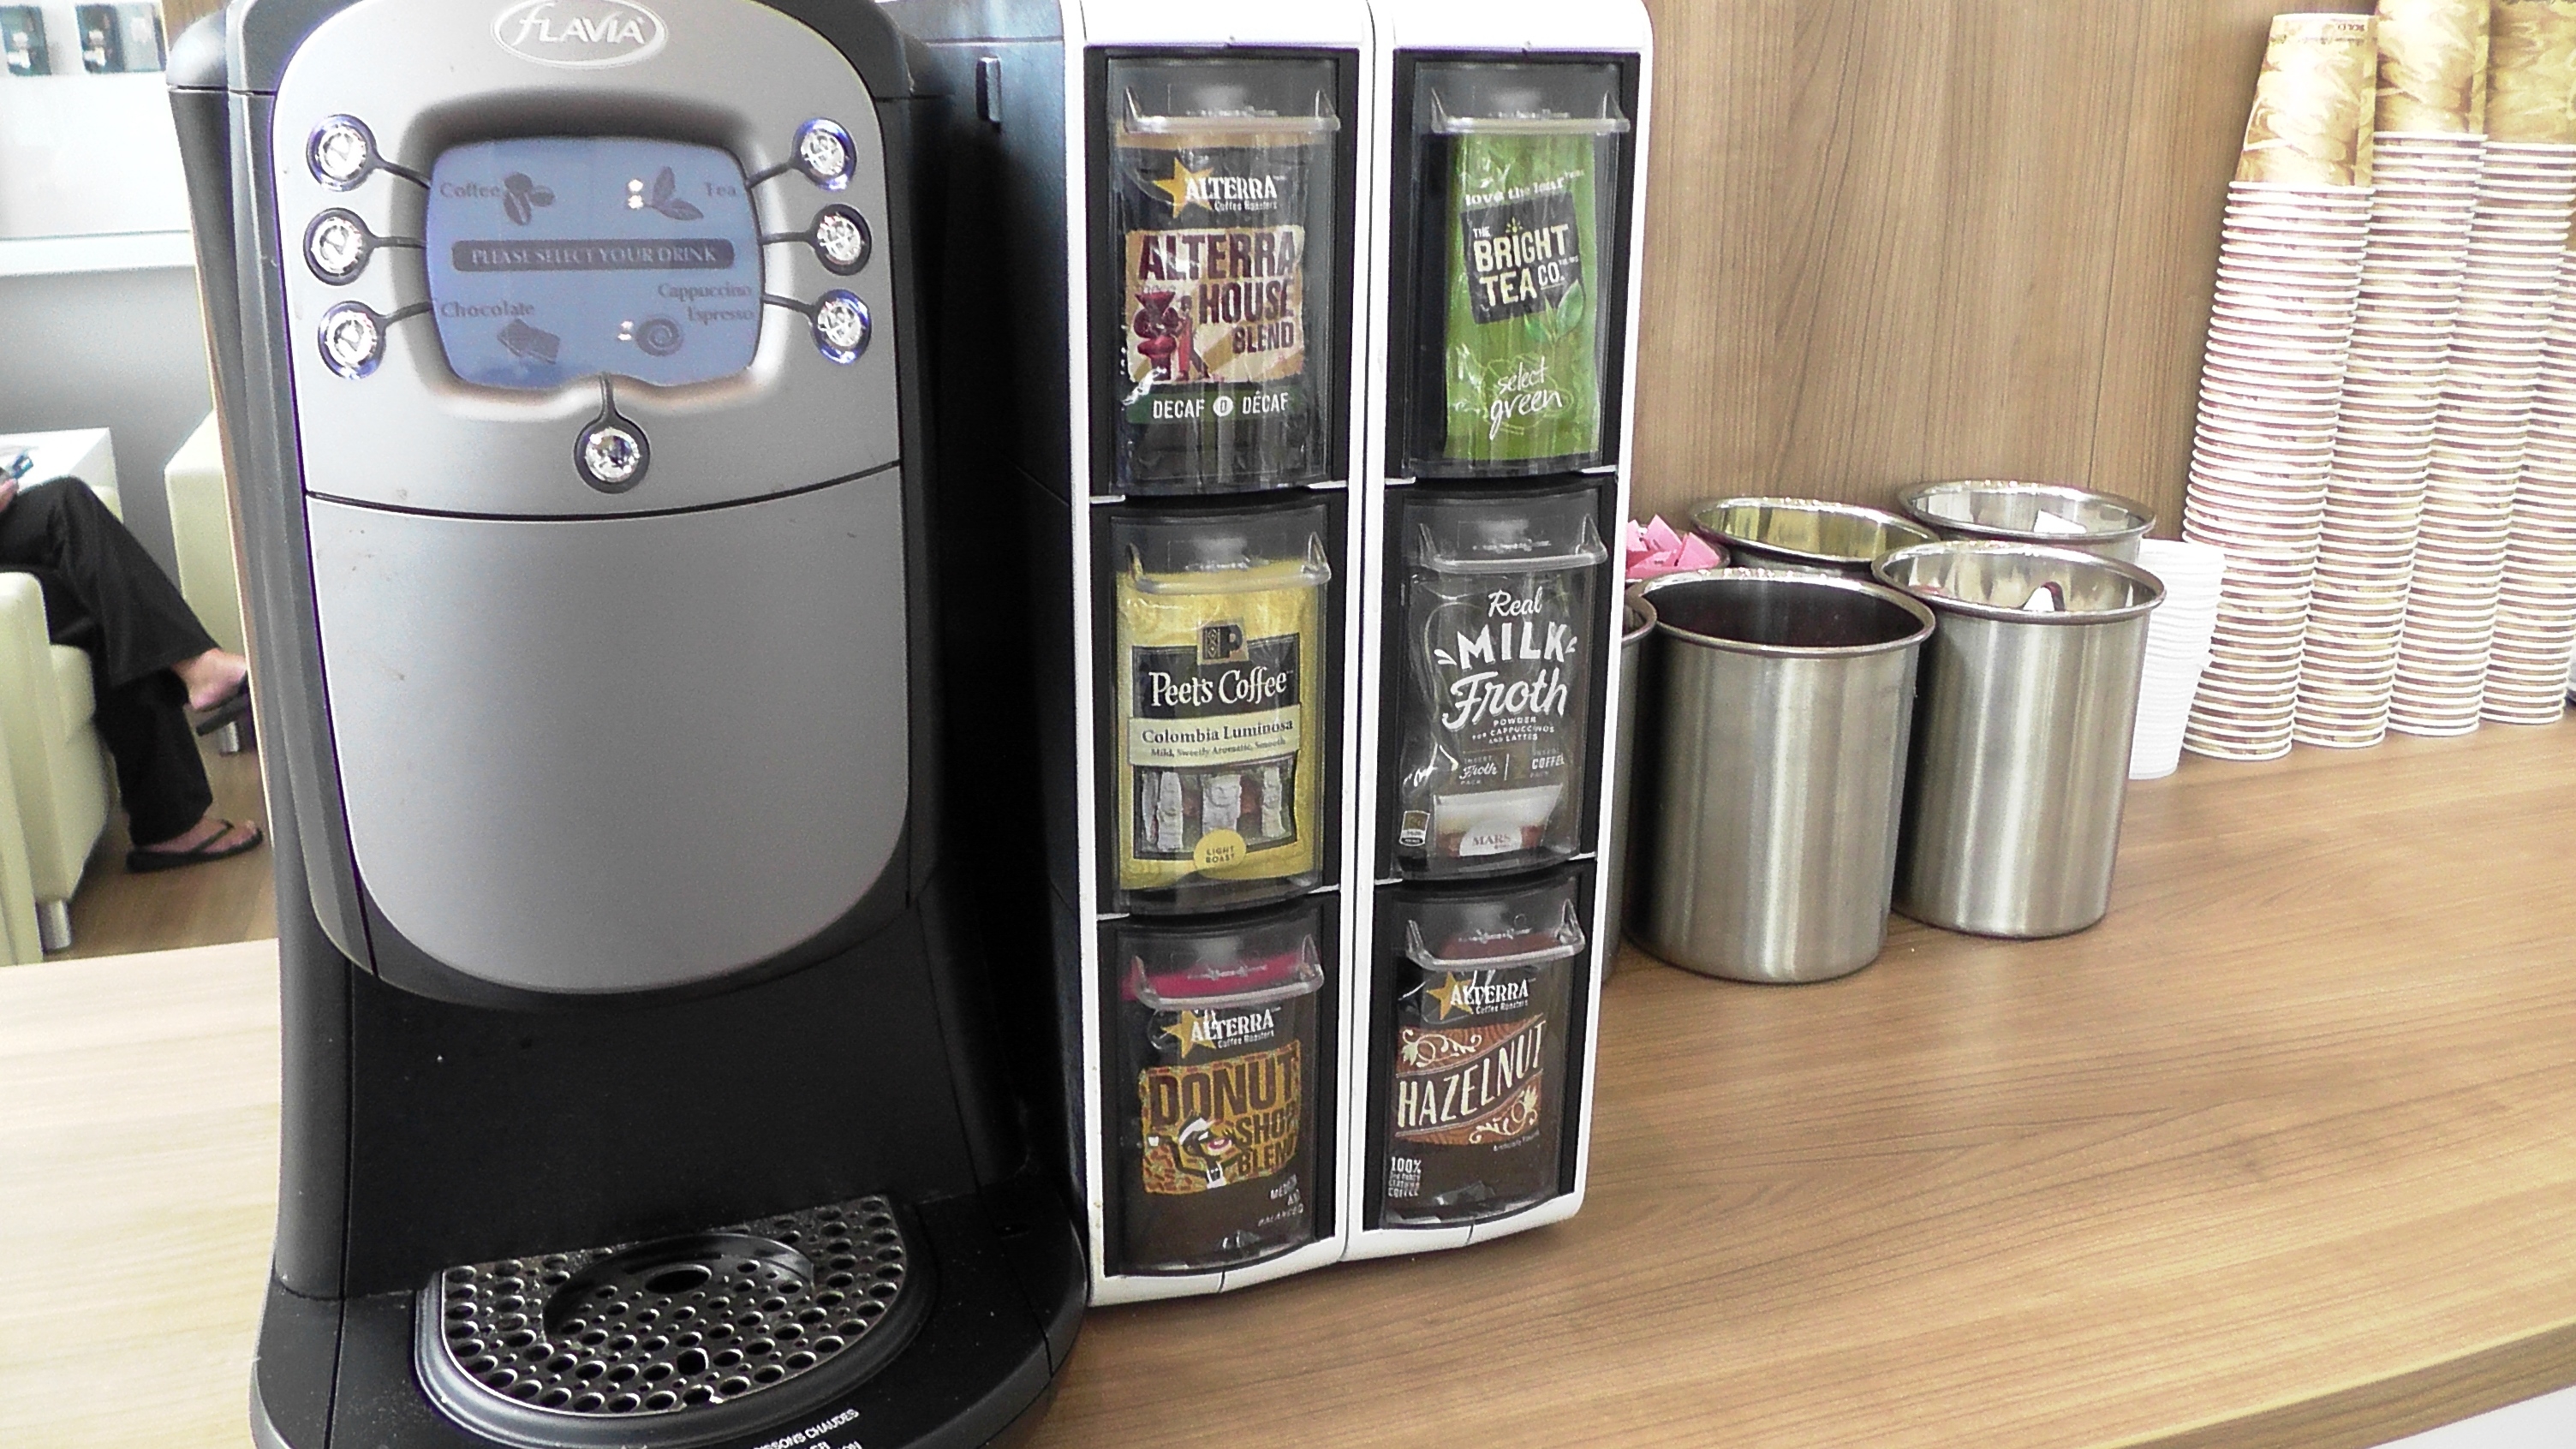 We're not like most dealerships. You won't find your typical refreshments at Kelly Volkswagen. We offer you variety! Six different types of coffee to brew with K-Cups and free Wi-Fi will make your visit with our dealership fly by. Come in today even if it's just for a quick cup of coffee and to say hello!